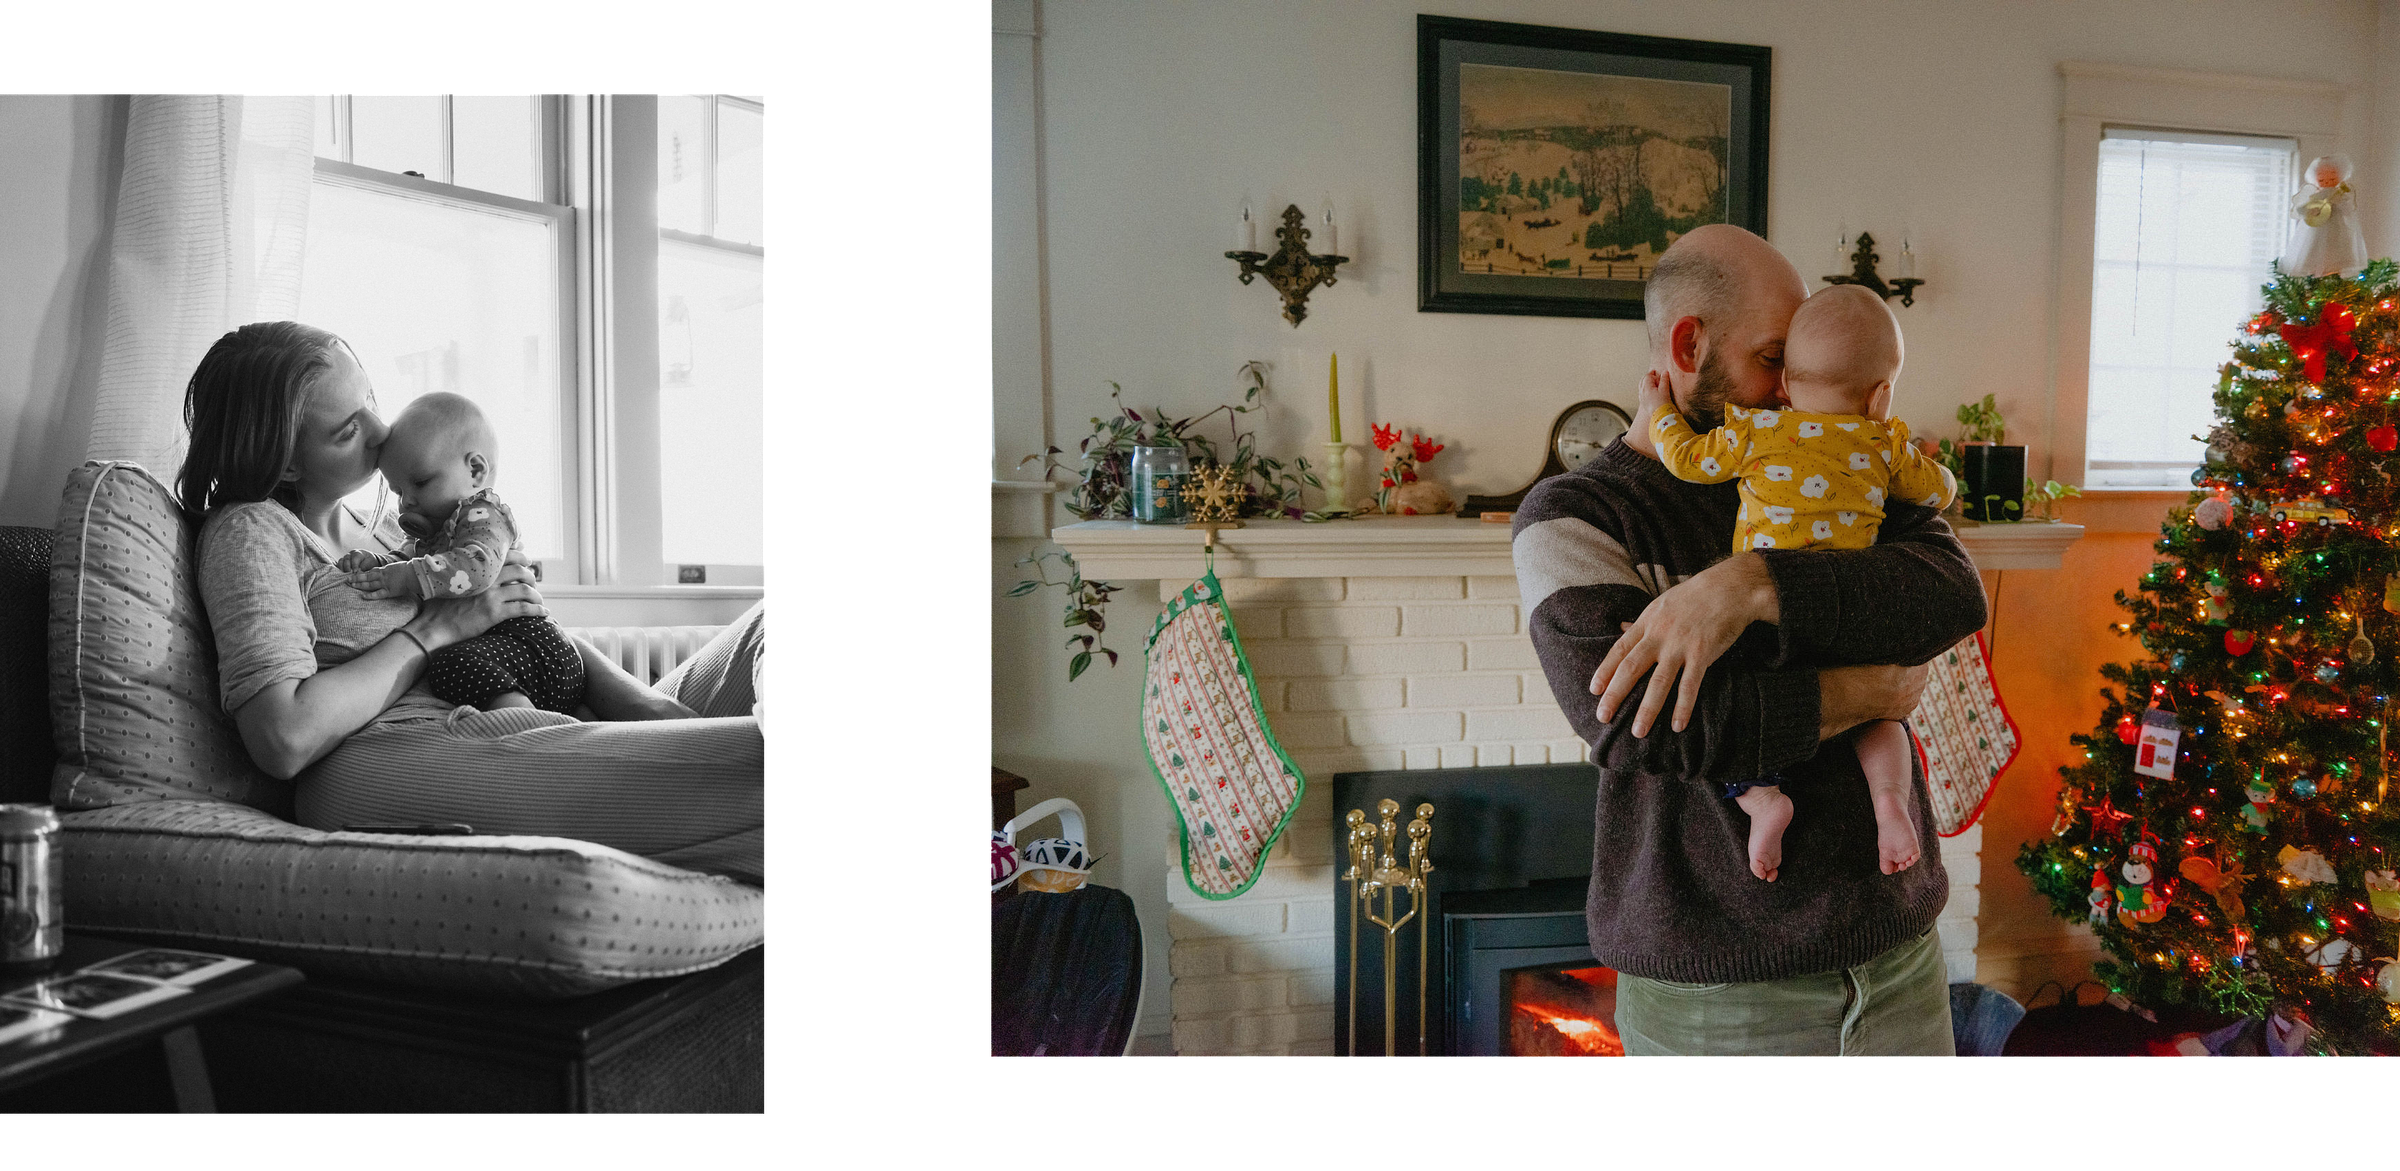 two photographs by the author in their friend's pennsylvania home. The first image to the left is a black and white photographing showing Shawna kissing her baby on the head. The image to the right is a color photograph of Jake holding their baby. The background has a christmas tree and other holiday decorations.